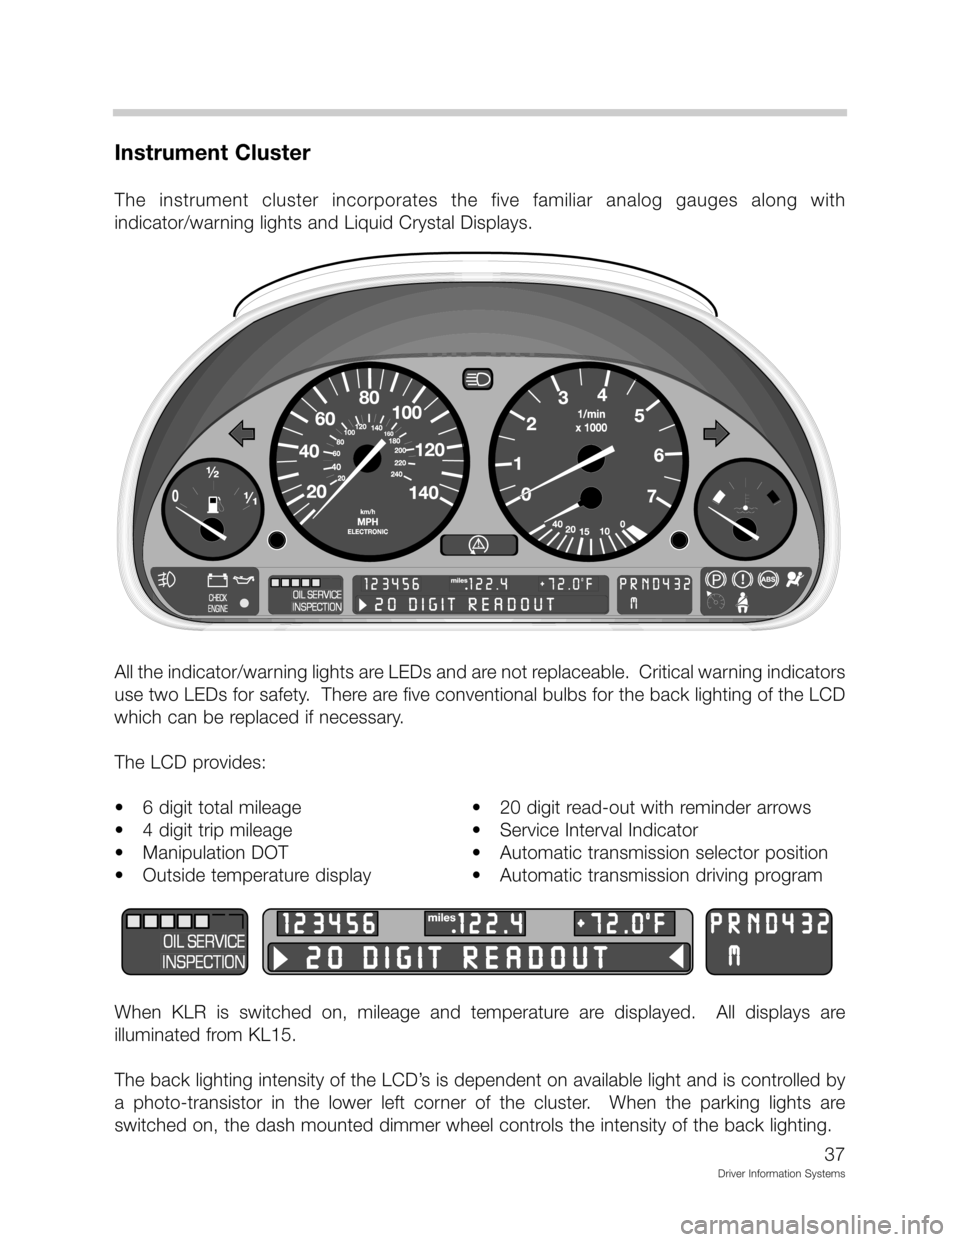 BMW Z3 CONVERTIBLE 2001 E36 Driver Information Systems Manual 
		
 	
 
	   ;2 ;

 
 	 
 :
!":
!1D	!


-

!":
1